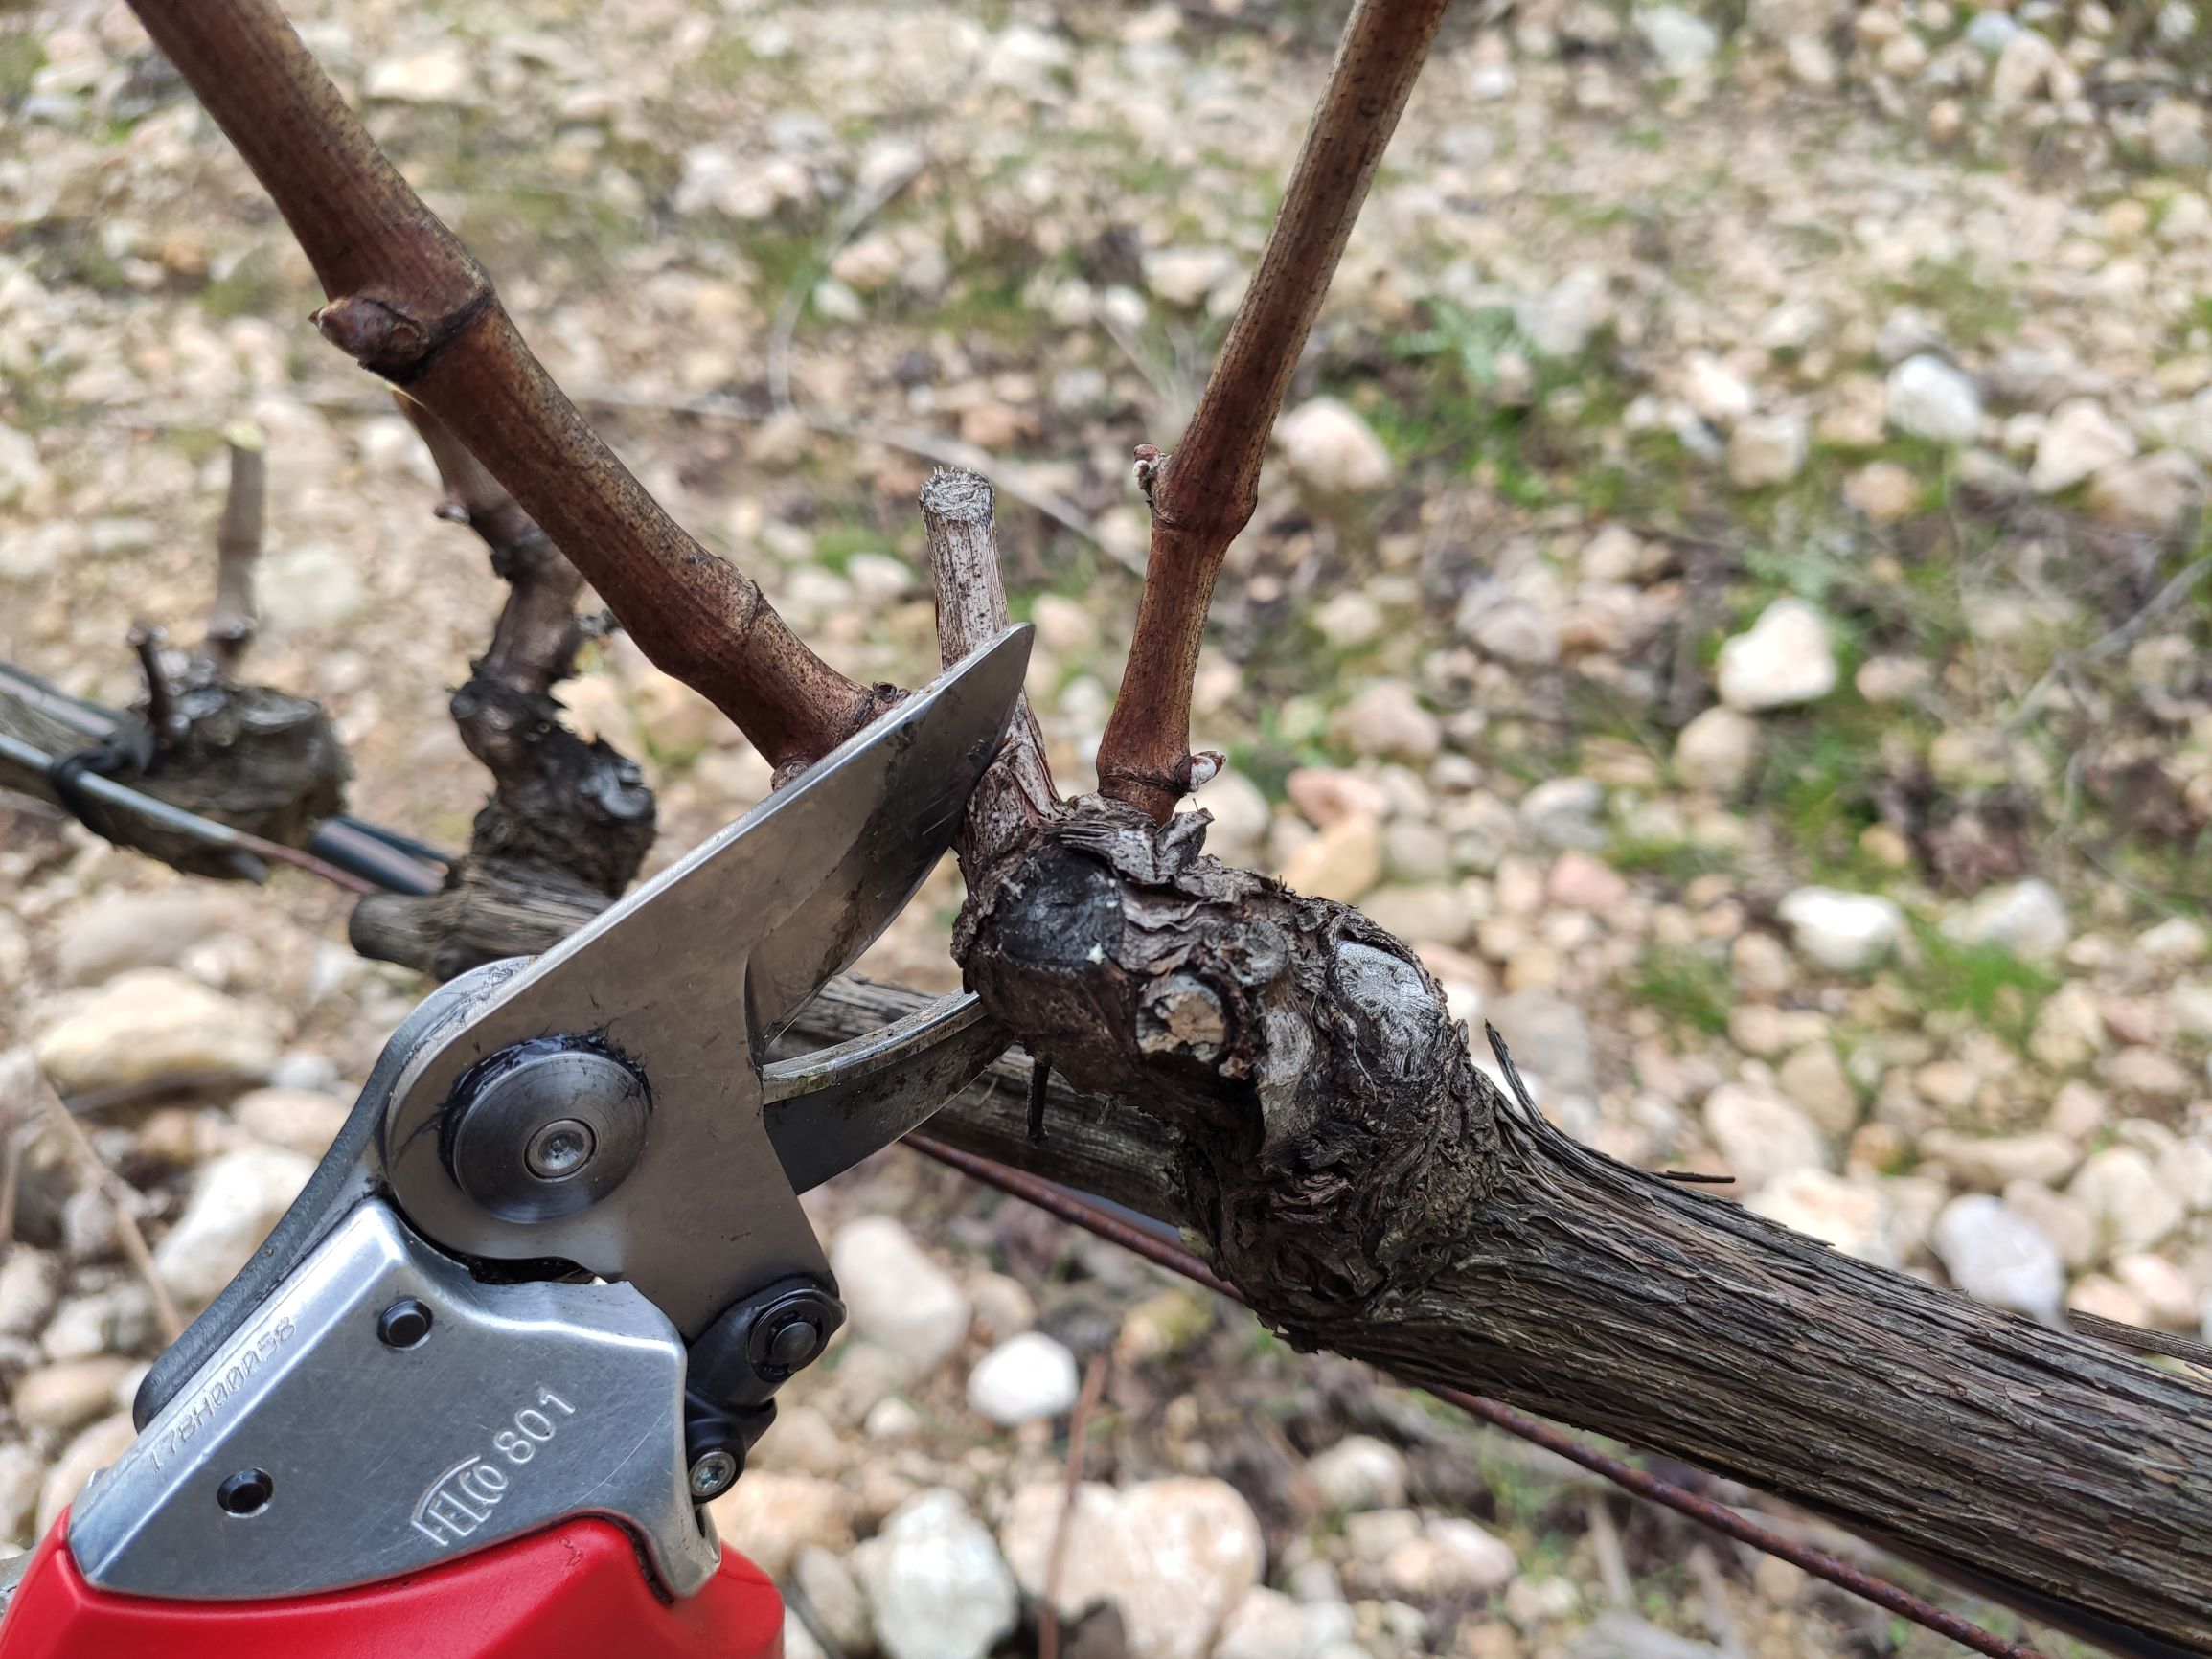 February at Son Vich: Pruning scissors